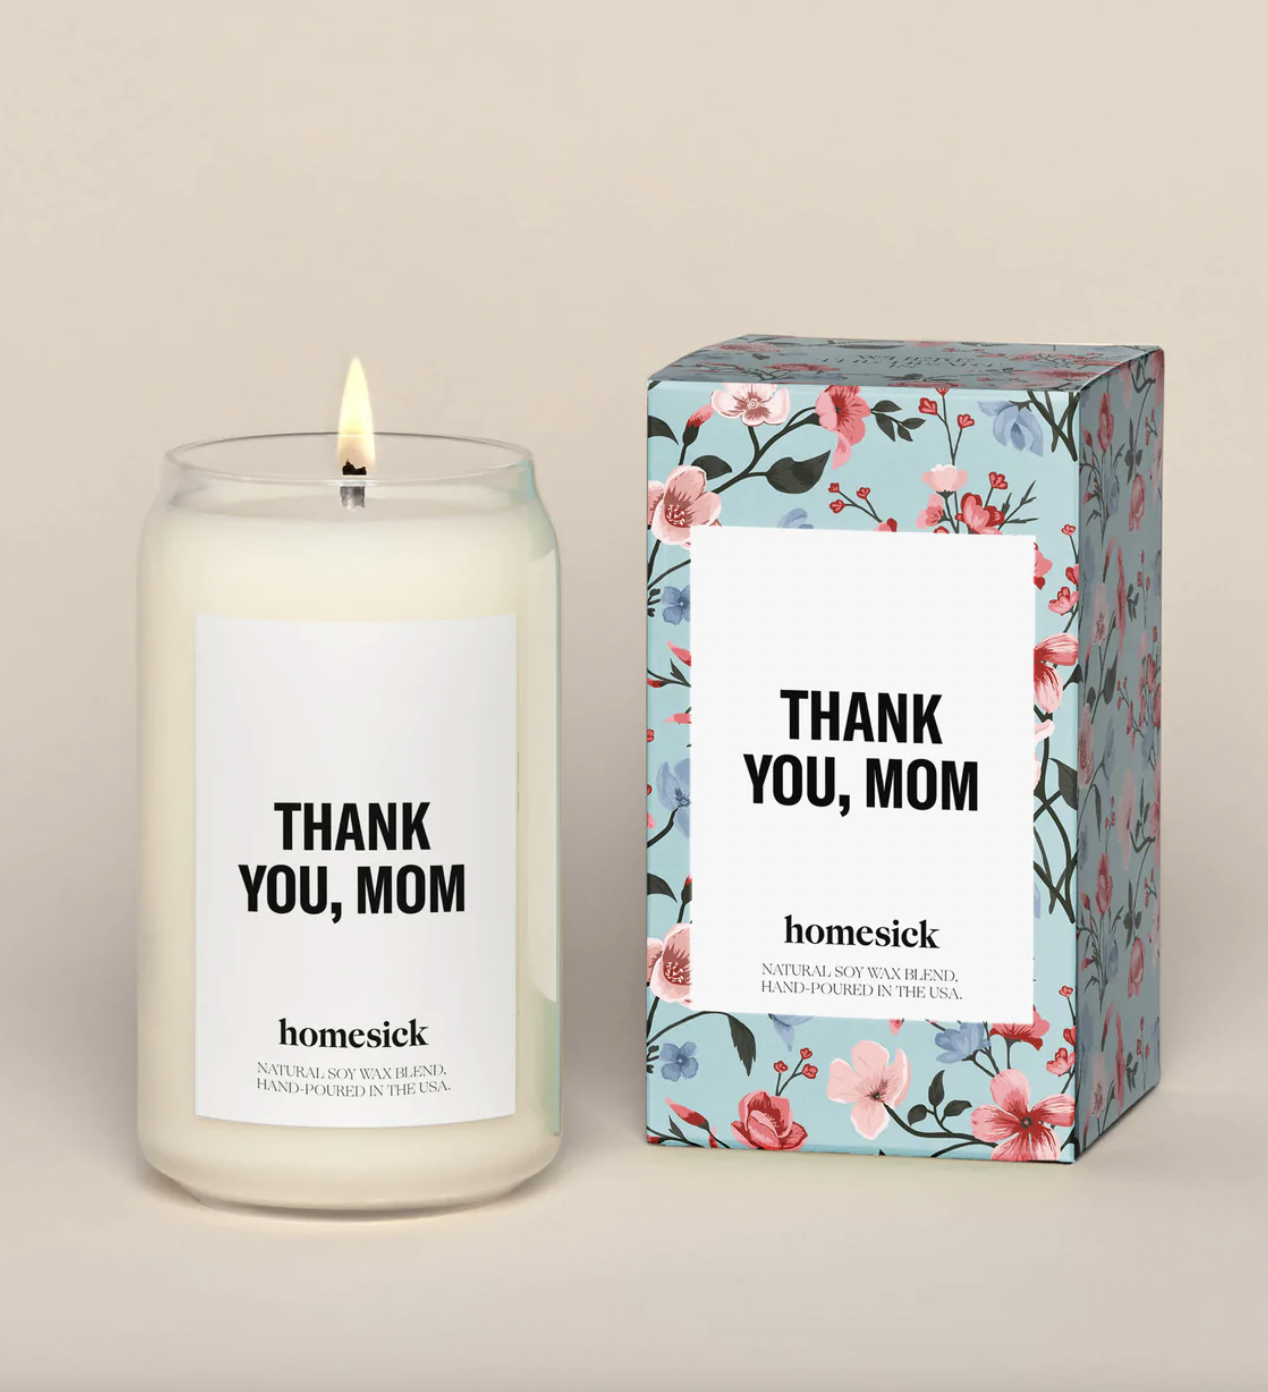 20 Priceless Mothers Day Gifts for Mom Cost  0  Vidya Sury Collecting  Smiles